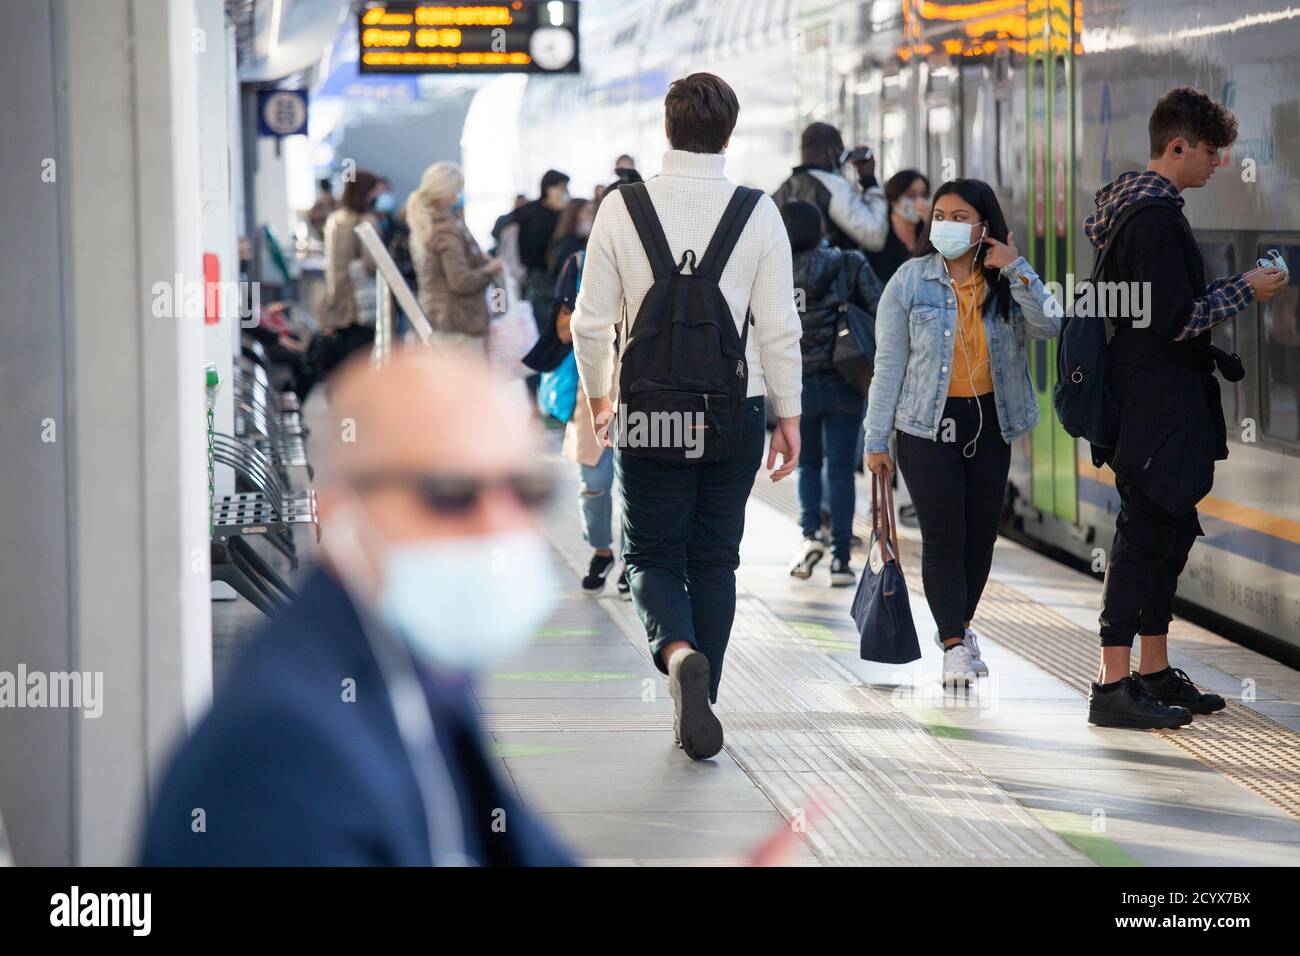 ROME, ITALY - OCTOBER 01 2020: Pedestrians, wearing protective face masks, disembark from a train in Rome, Italy. Stock Photo